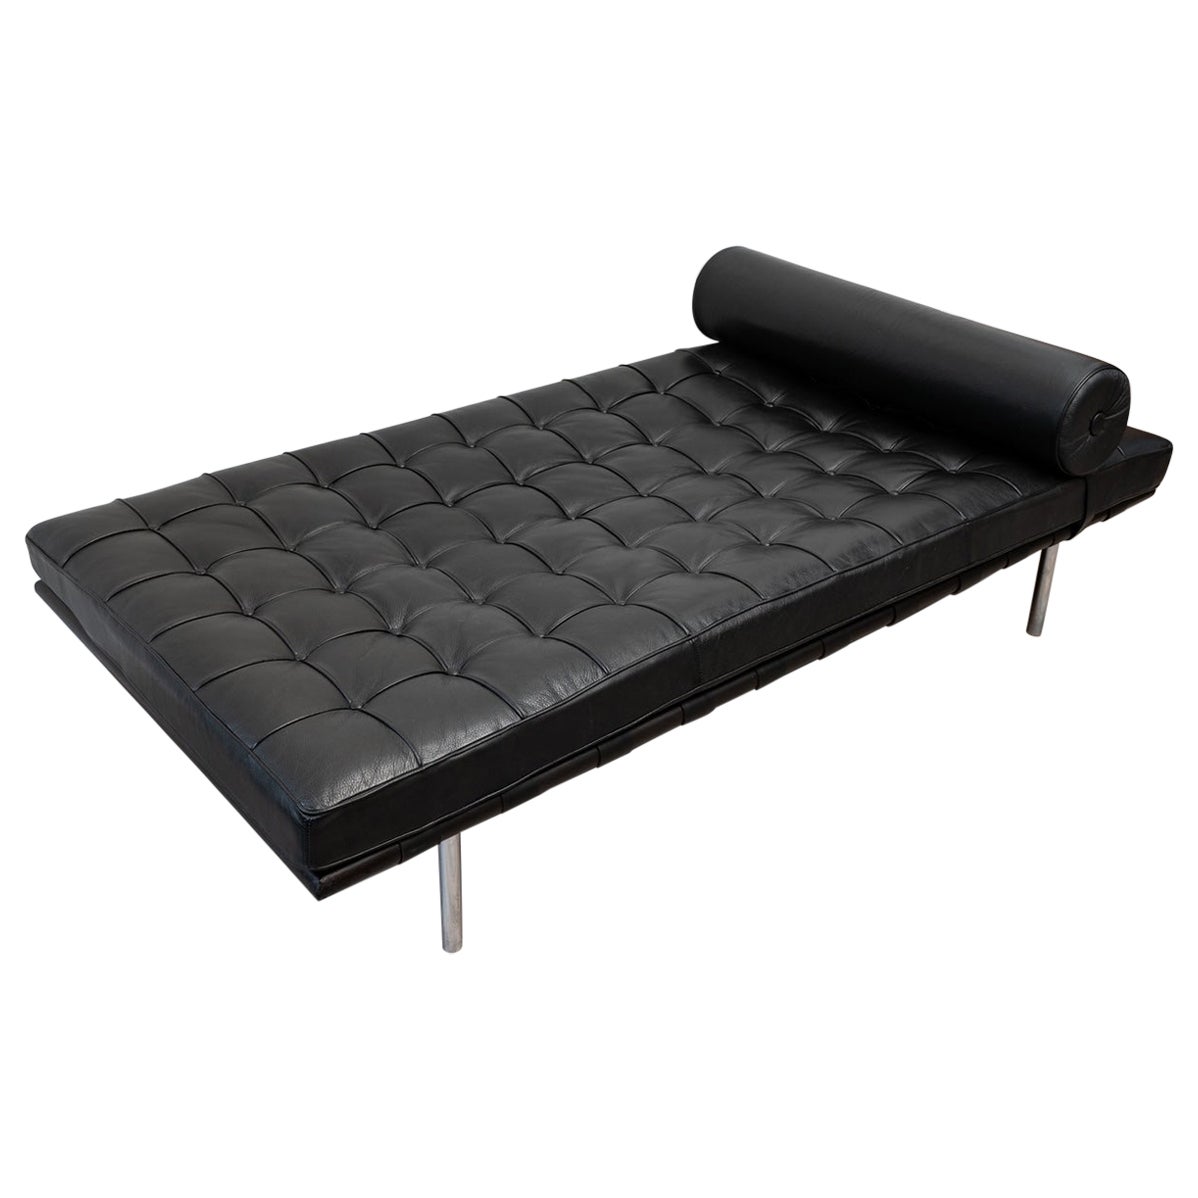 Ludwig Mies van der Rohe, Knoll International, Barcelona Daybed Black Leather